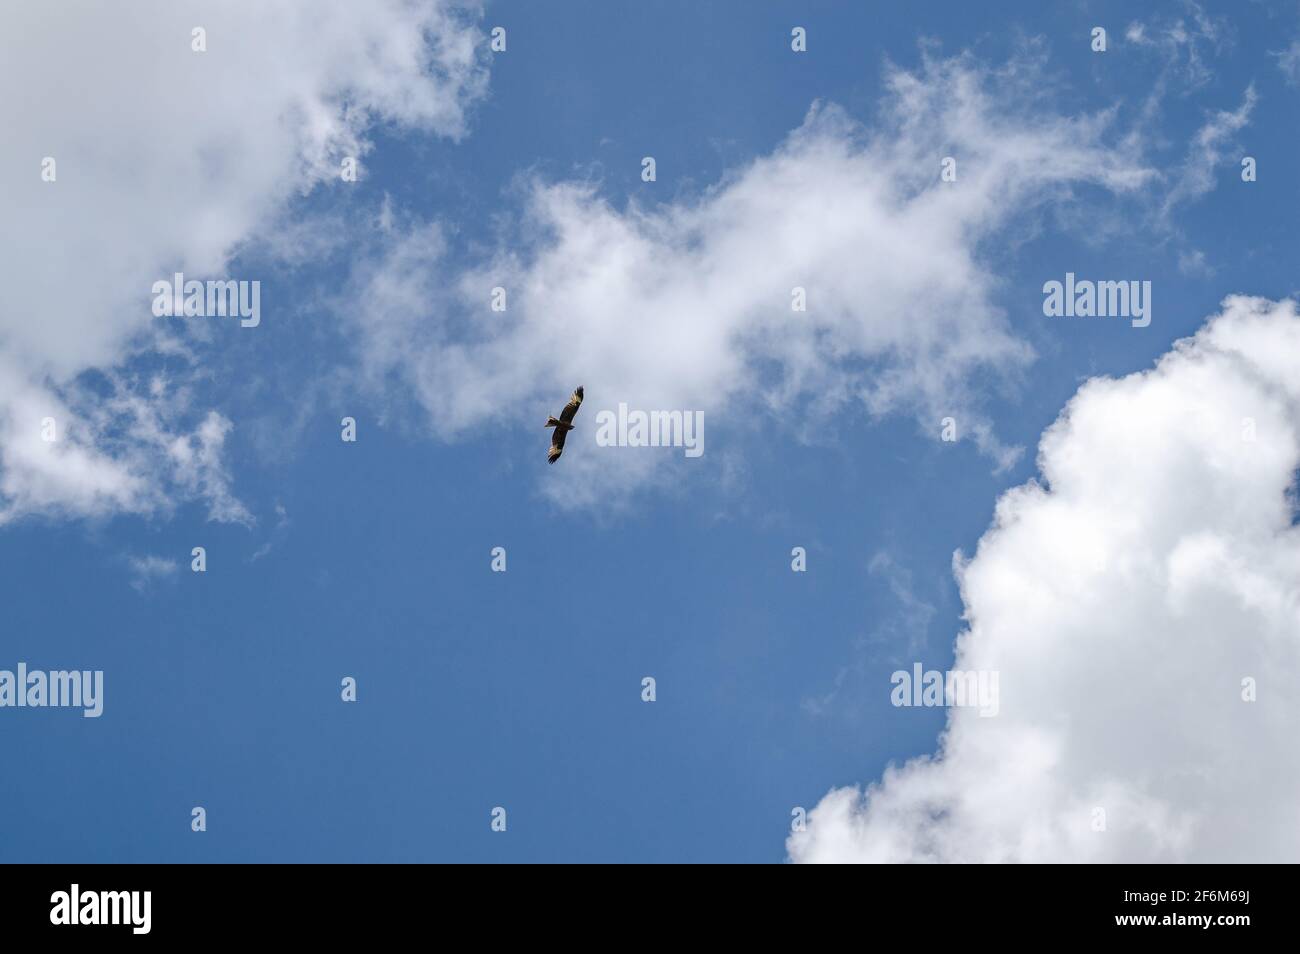 Soaring eagle background blue sky with clouds Stock Photo